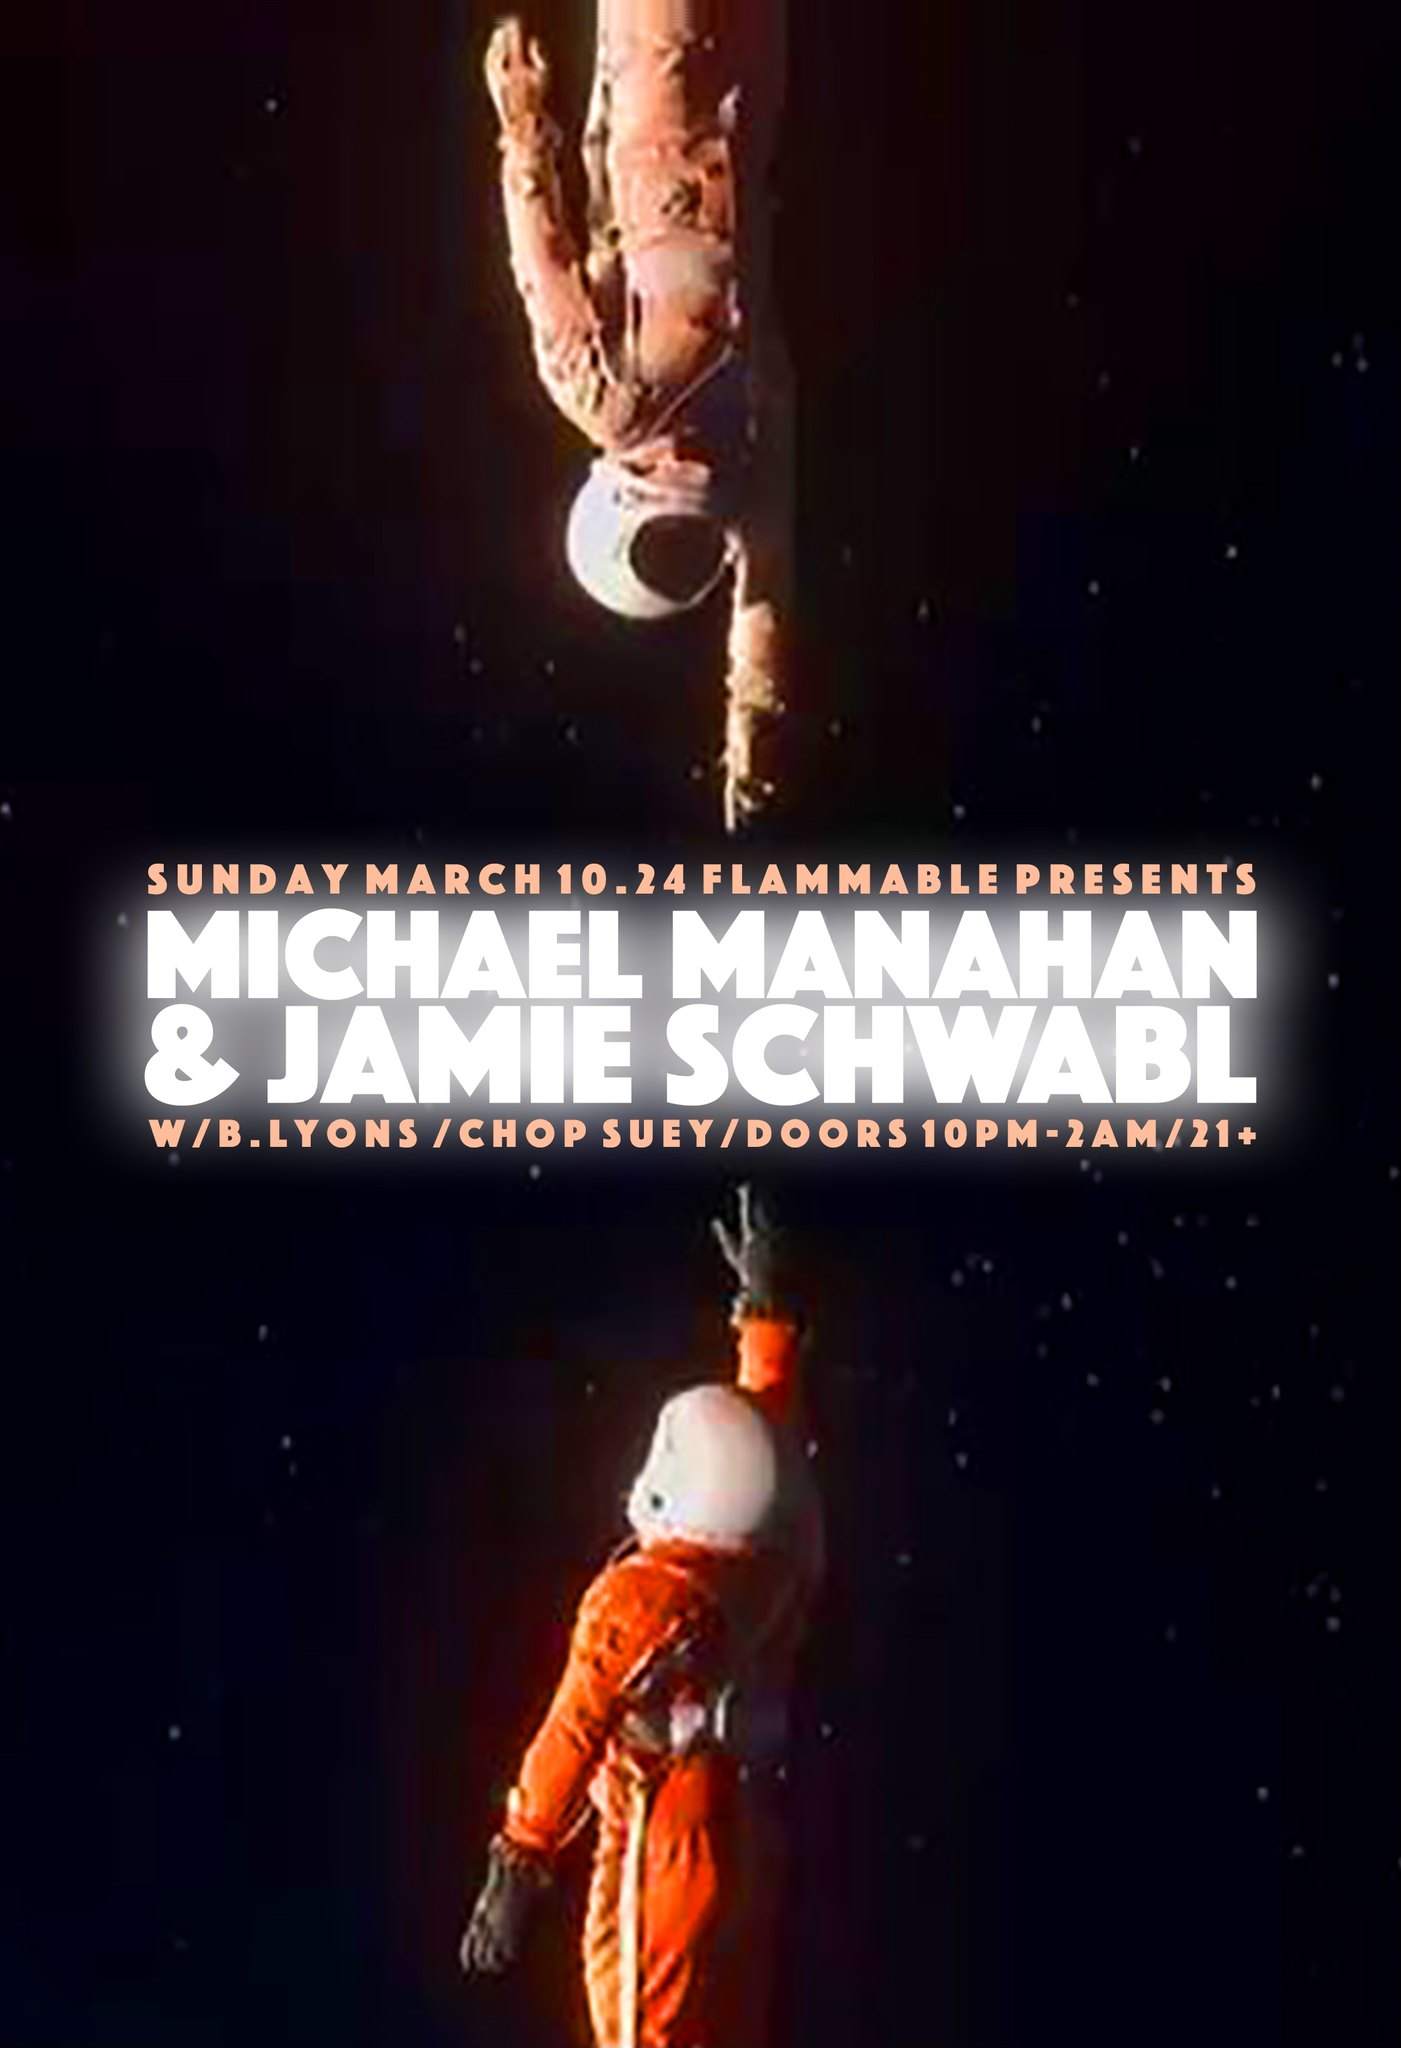 Flammablepresents: Michael Manahan & Jamie Schwabl! with resident B-Ly - フライヤー表